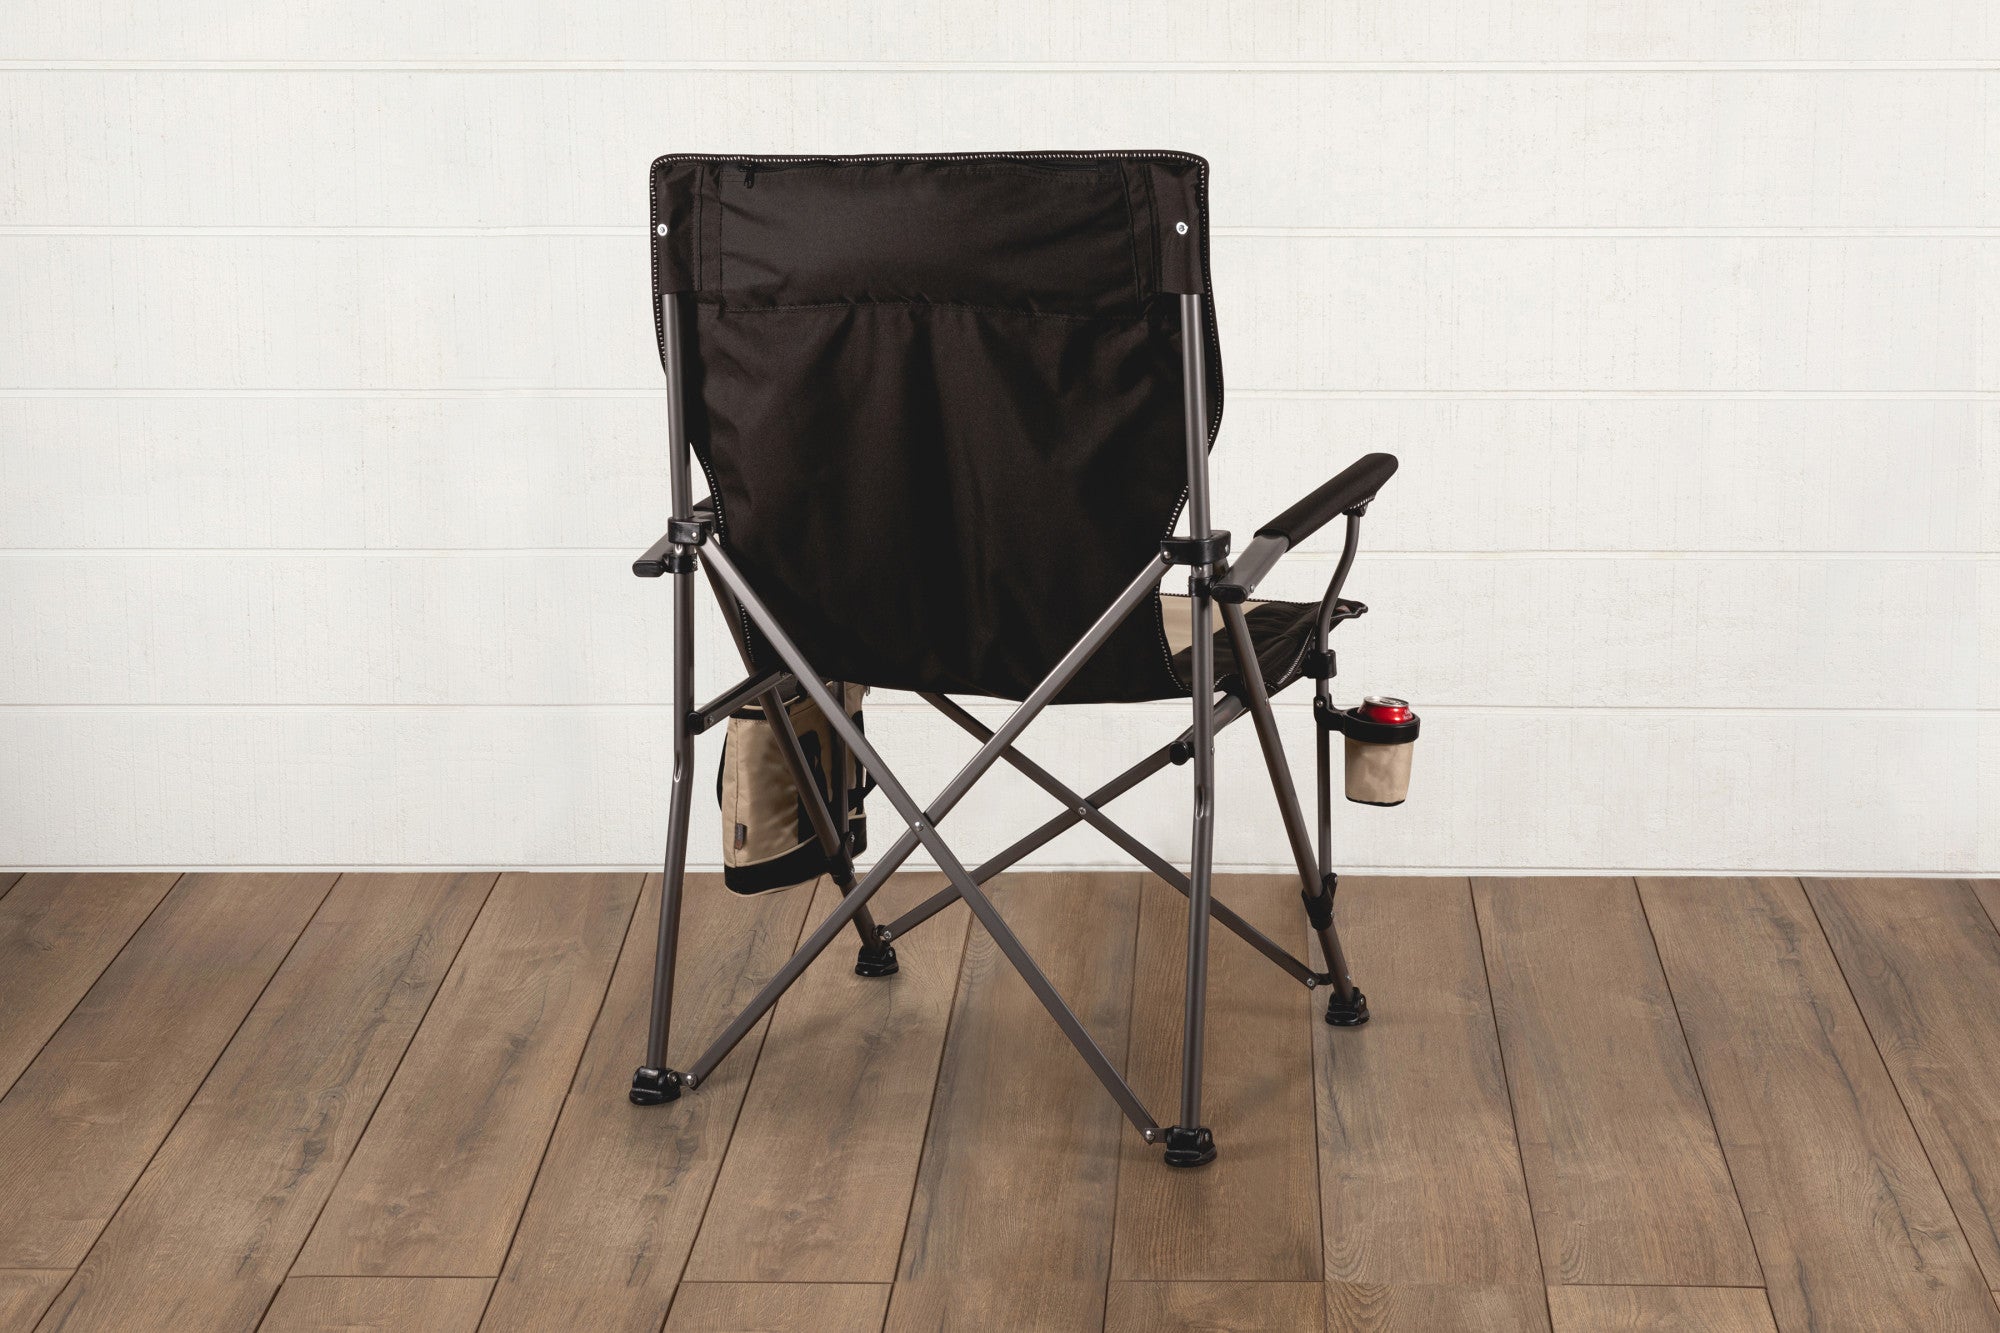 Michigan State Spartans - Big Bear XXL Camping Chair with Cooler